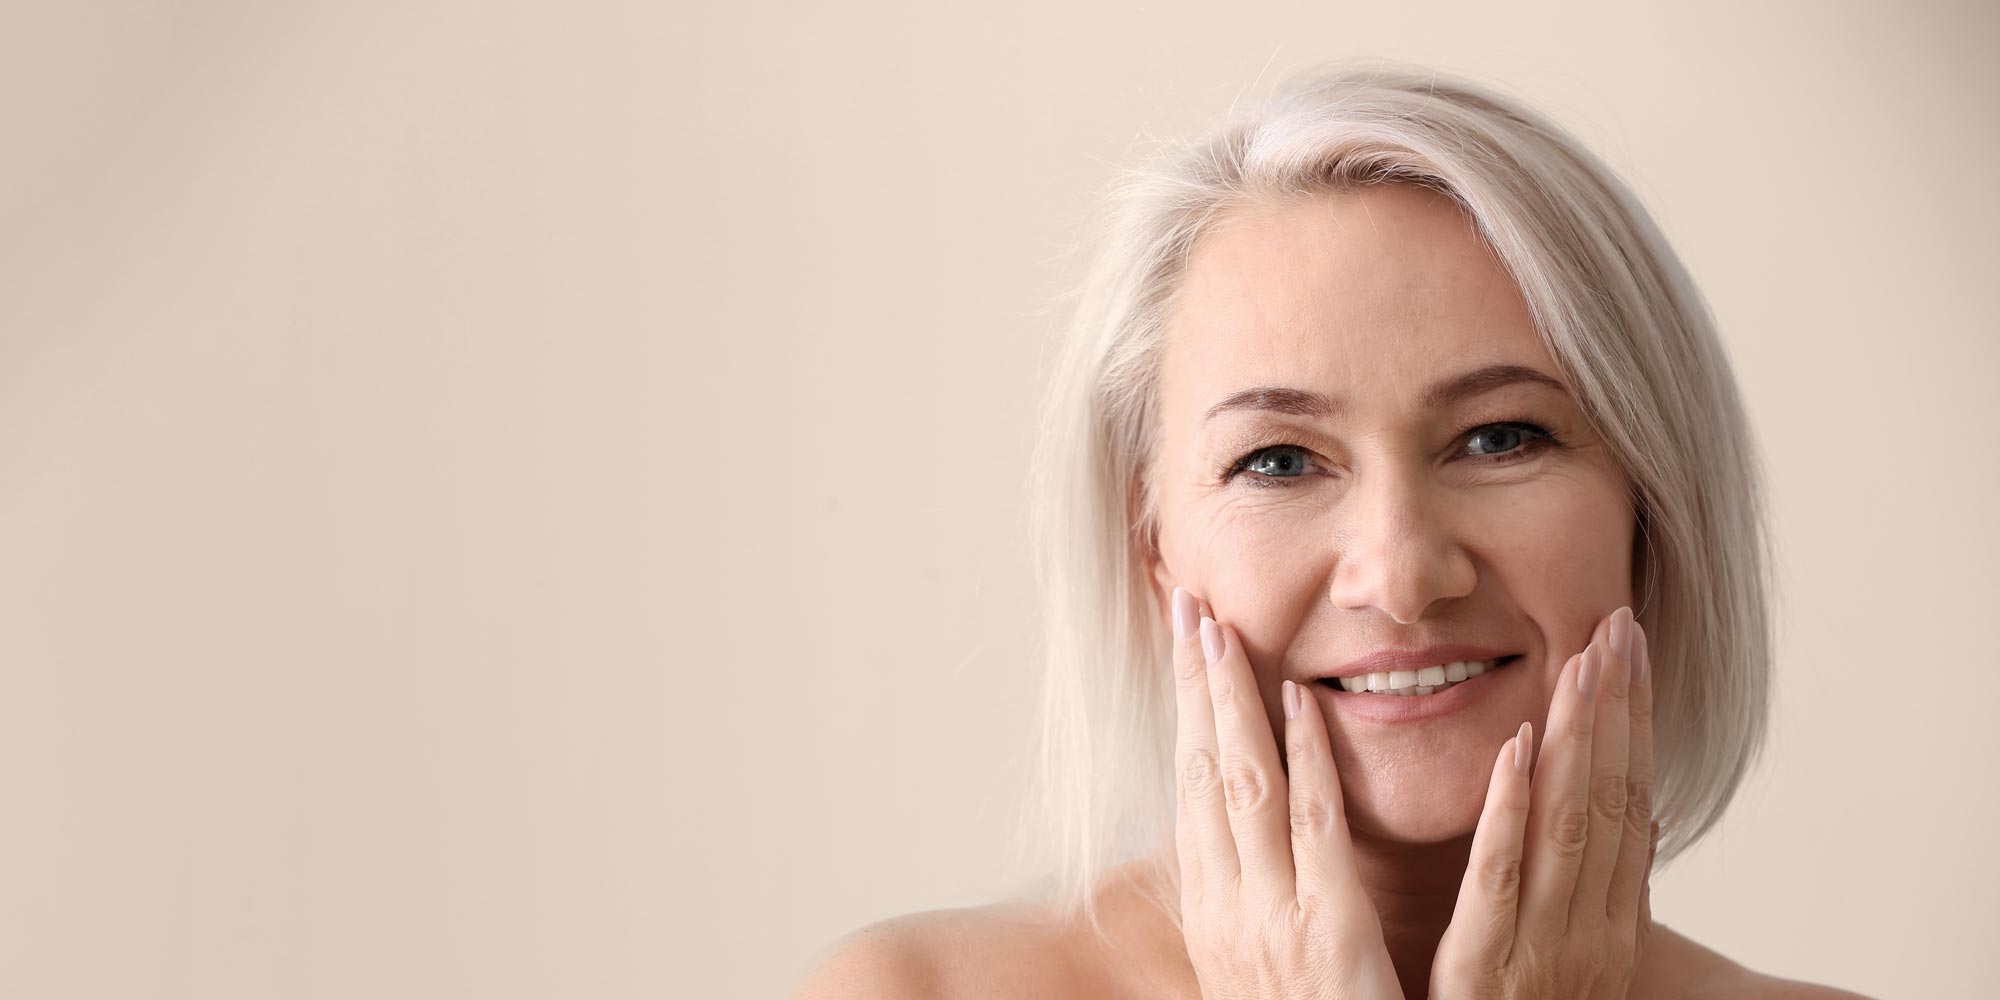 The Secret Benefits of Radiofrequency Skin Treatments